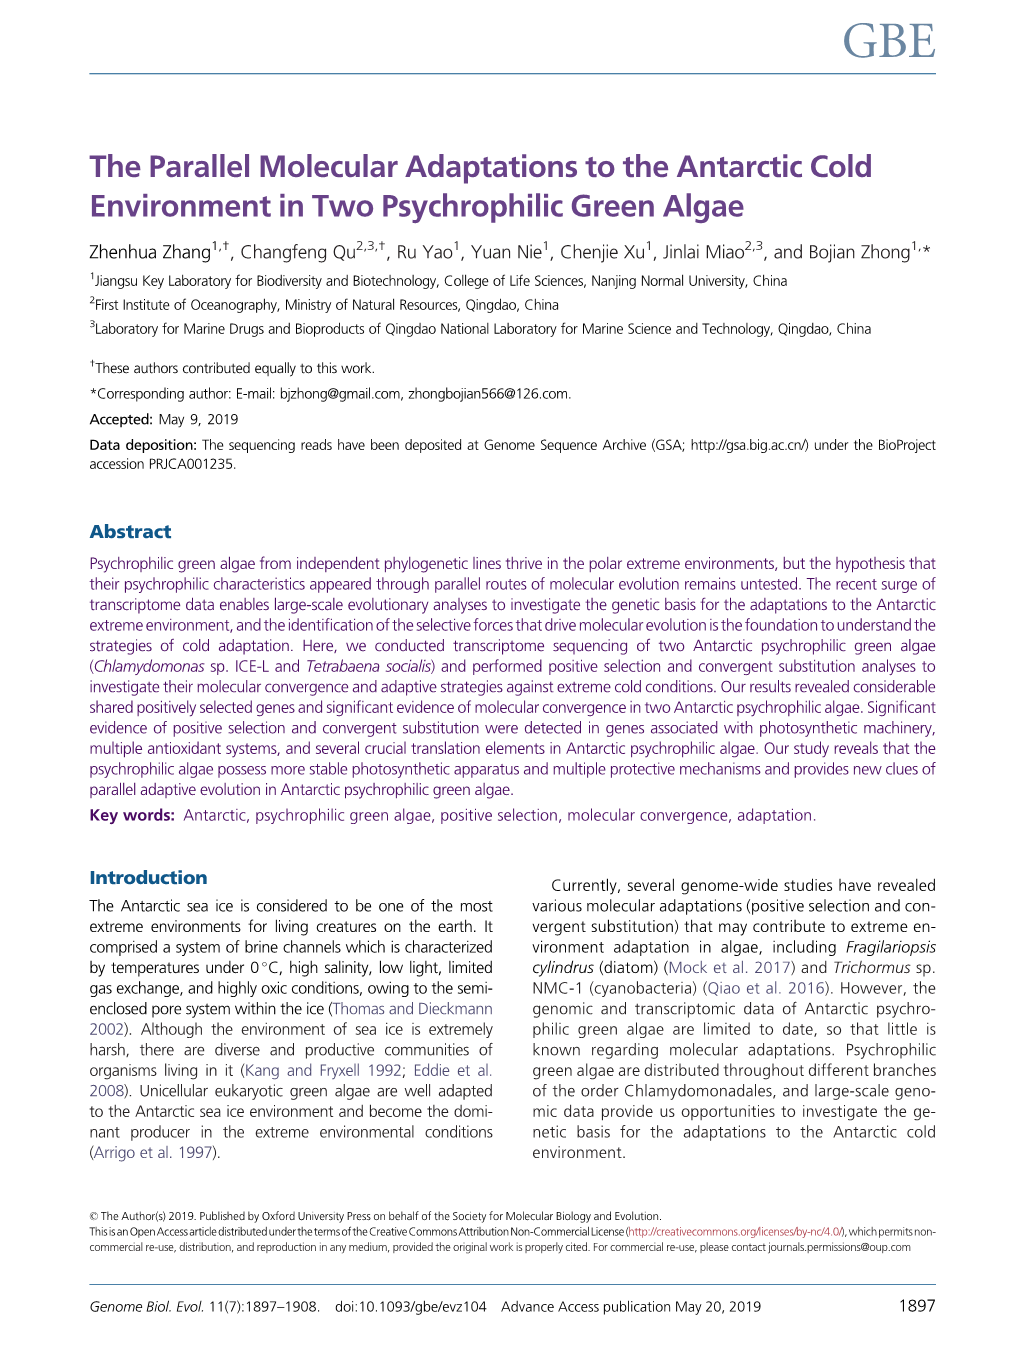 The Parallel Molecular Adaptations to the Antarctic Cold Environment in Two Psychrophilic Green Algae